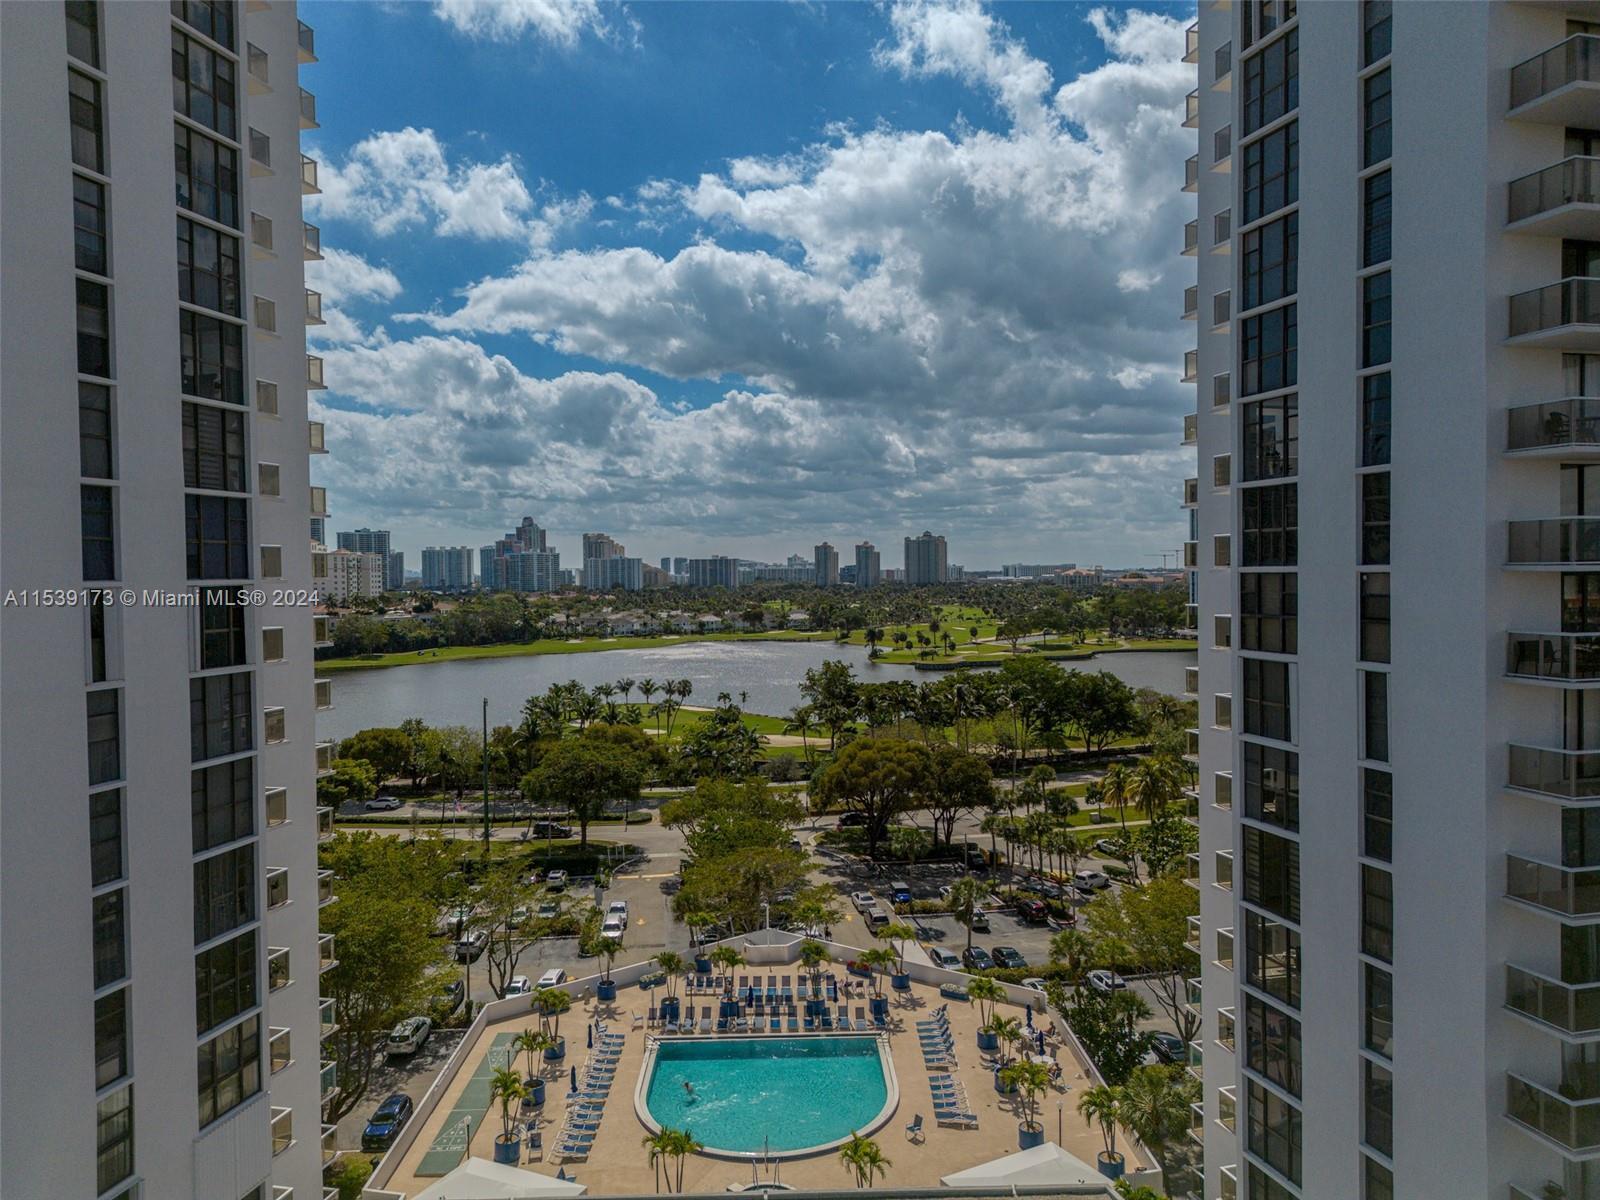 Photo of 3701 N Country Club Dr #309 in Aventura, FL